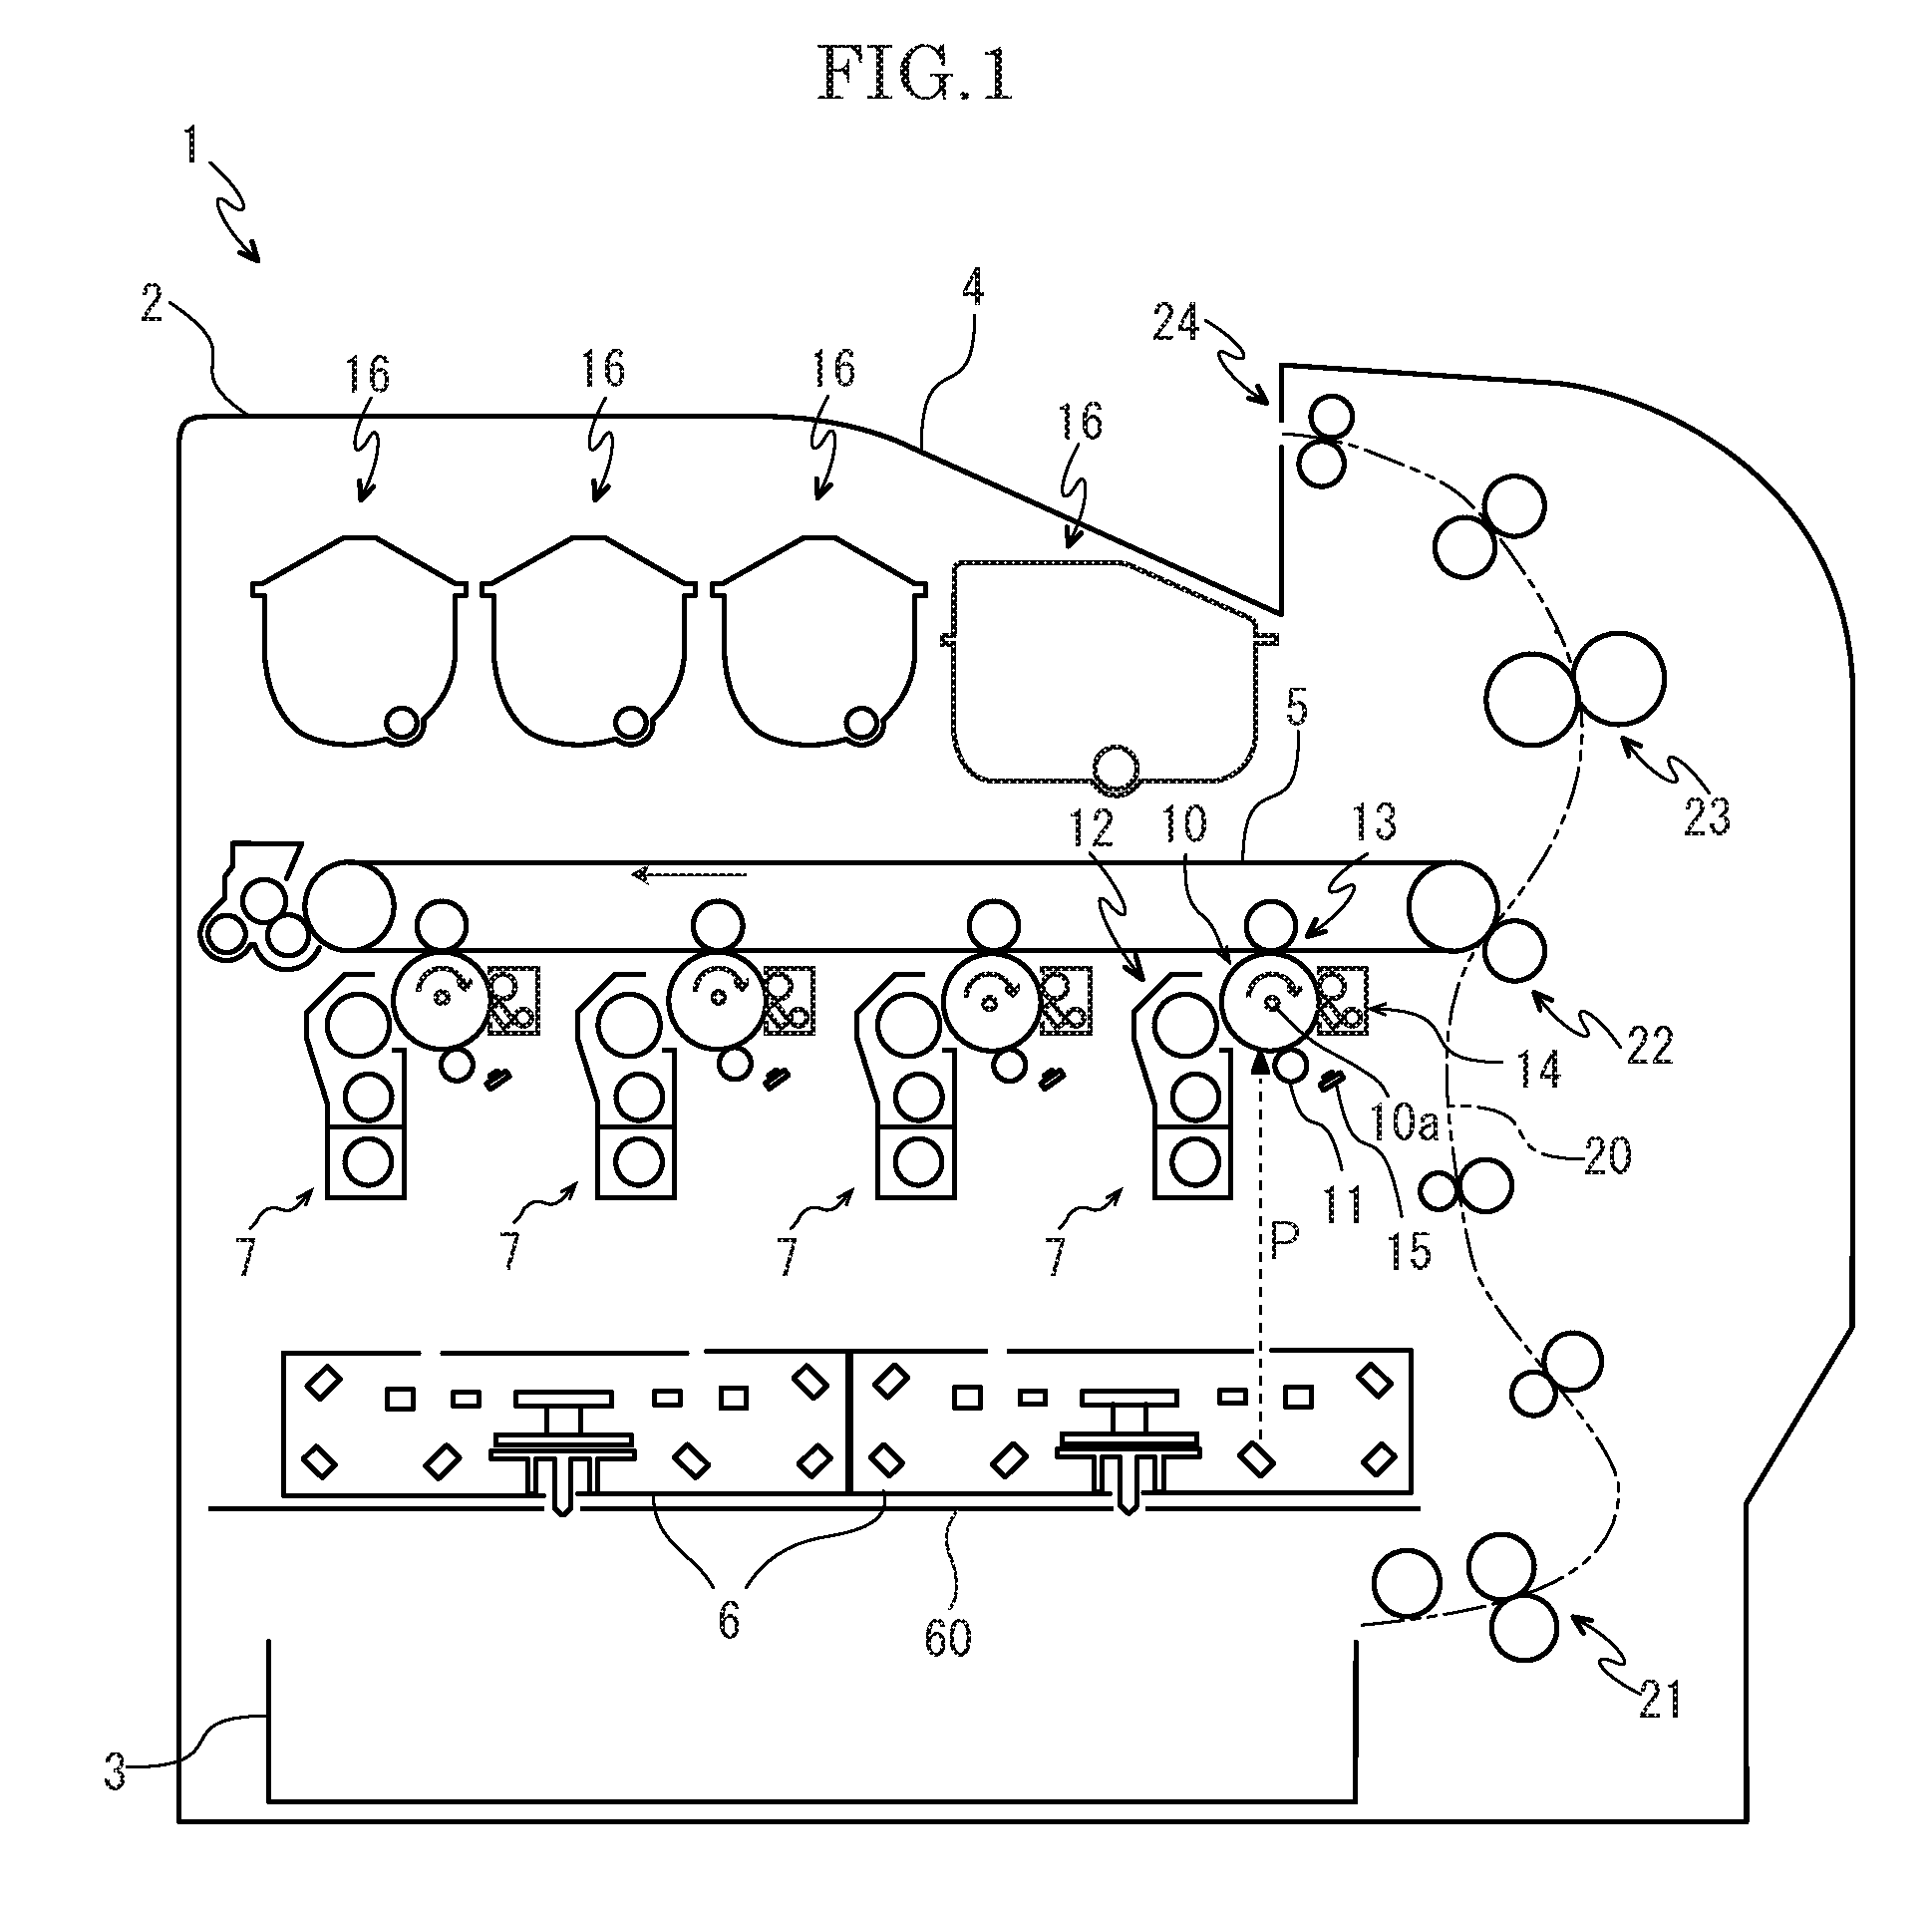 Image forming apparatus having scanning optical device